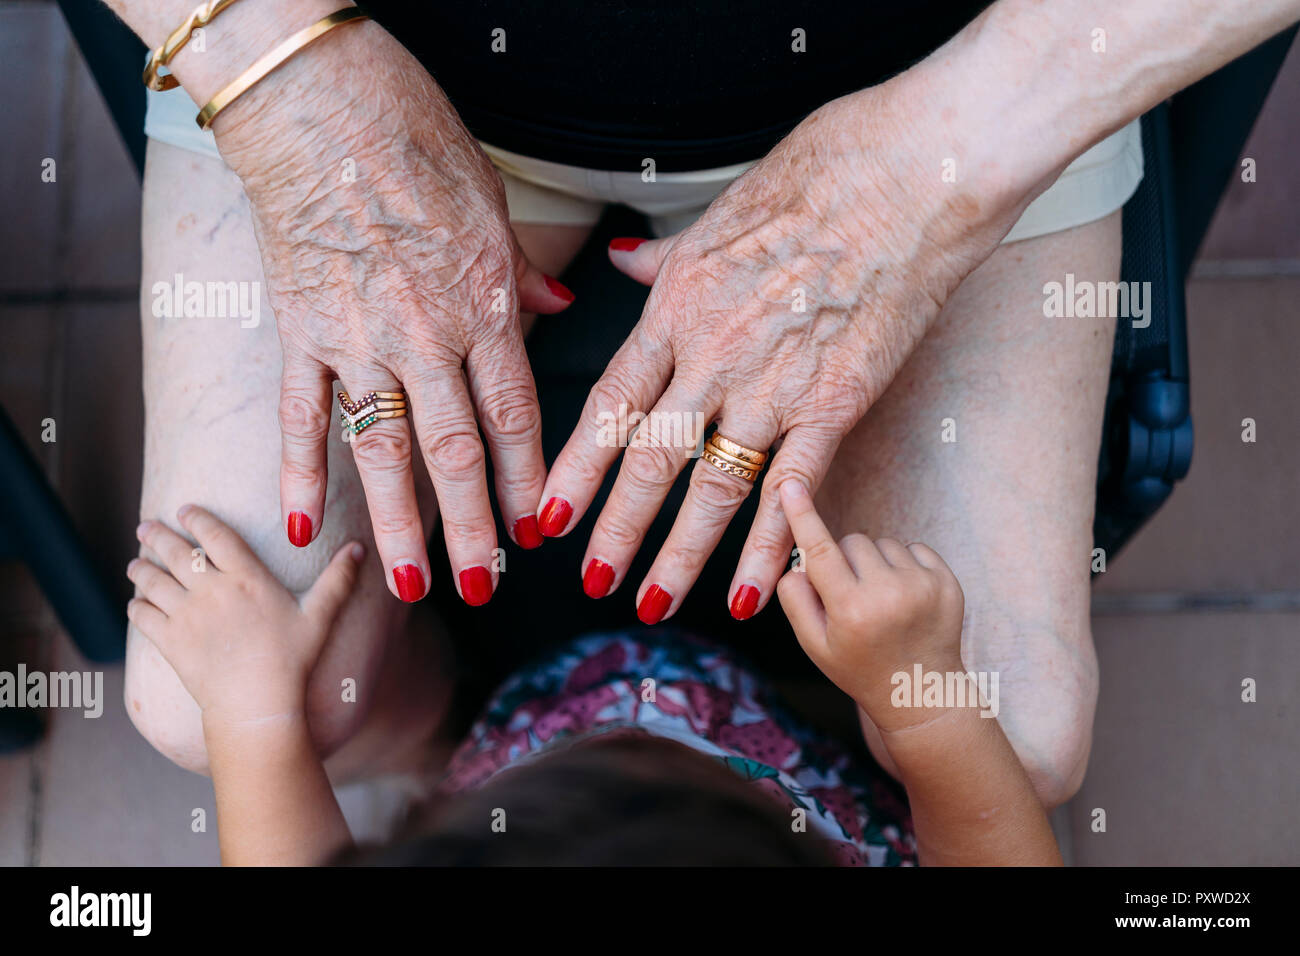 Hand of baby girl pointing on hand of senior woman with rings and red painted nails Stock Photo